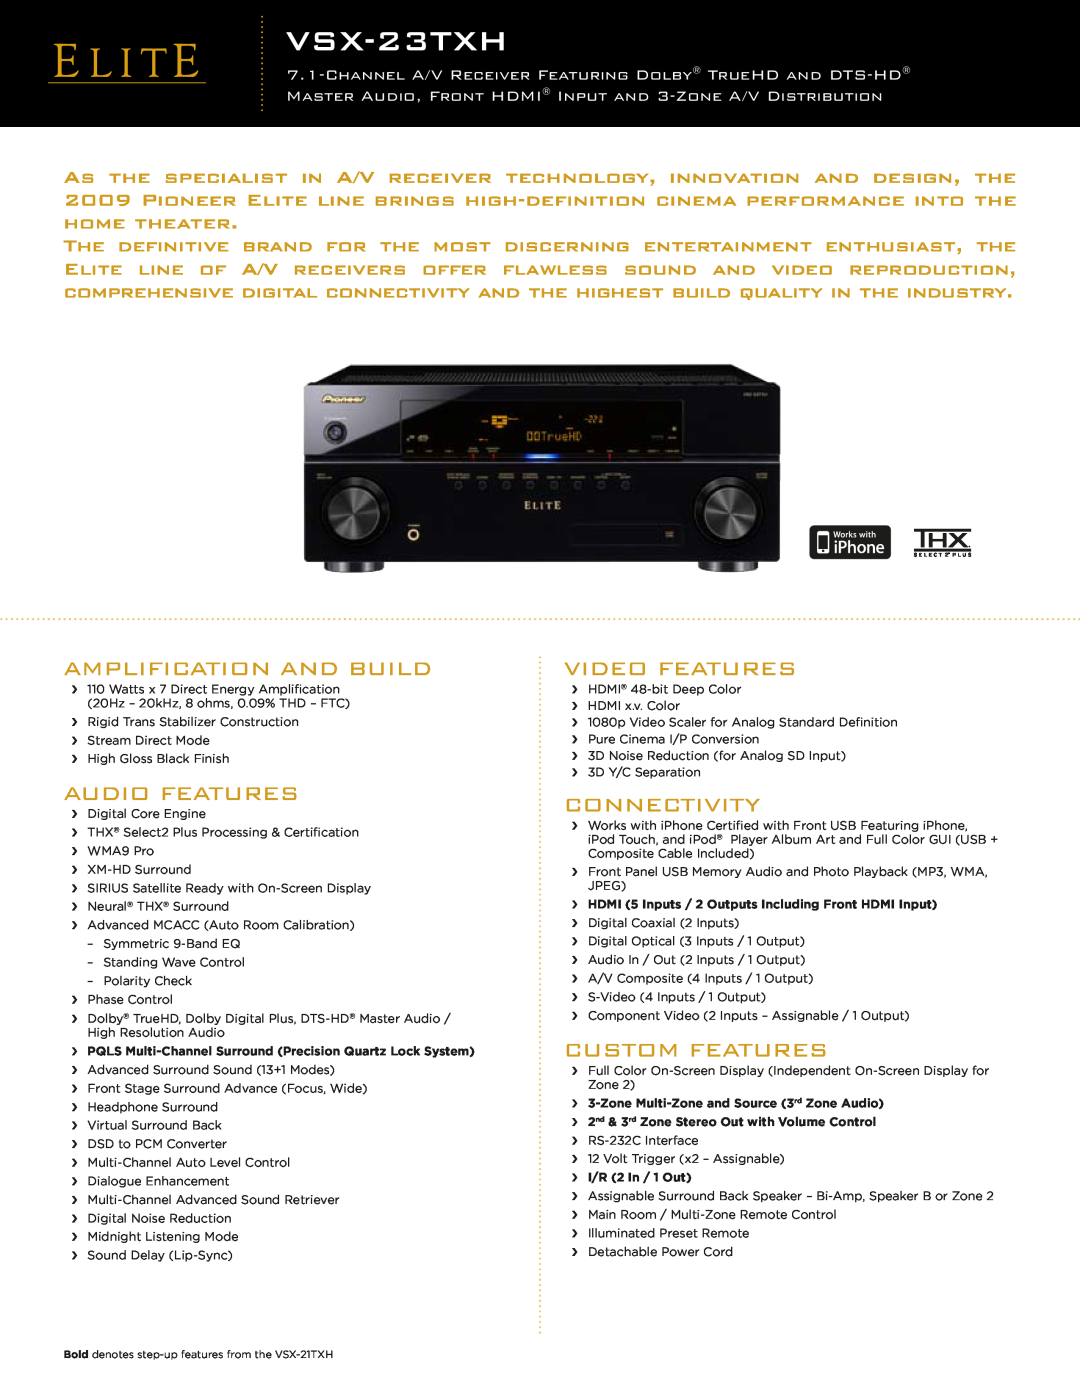 Pioneer VSX-23TXH manual Amplification And Build, Audio Features, Video Features, Connectivity, Custom Features 